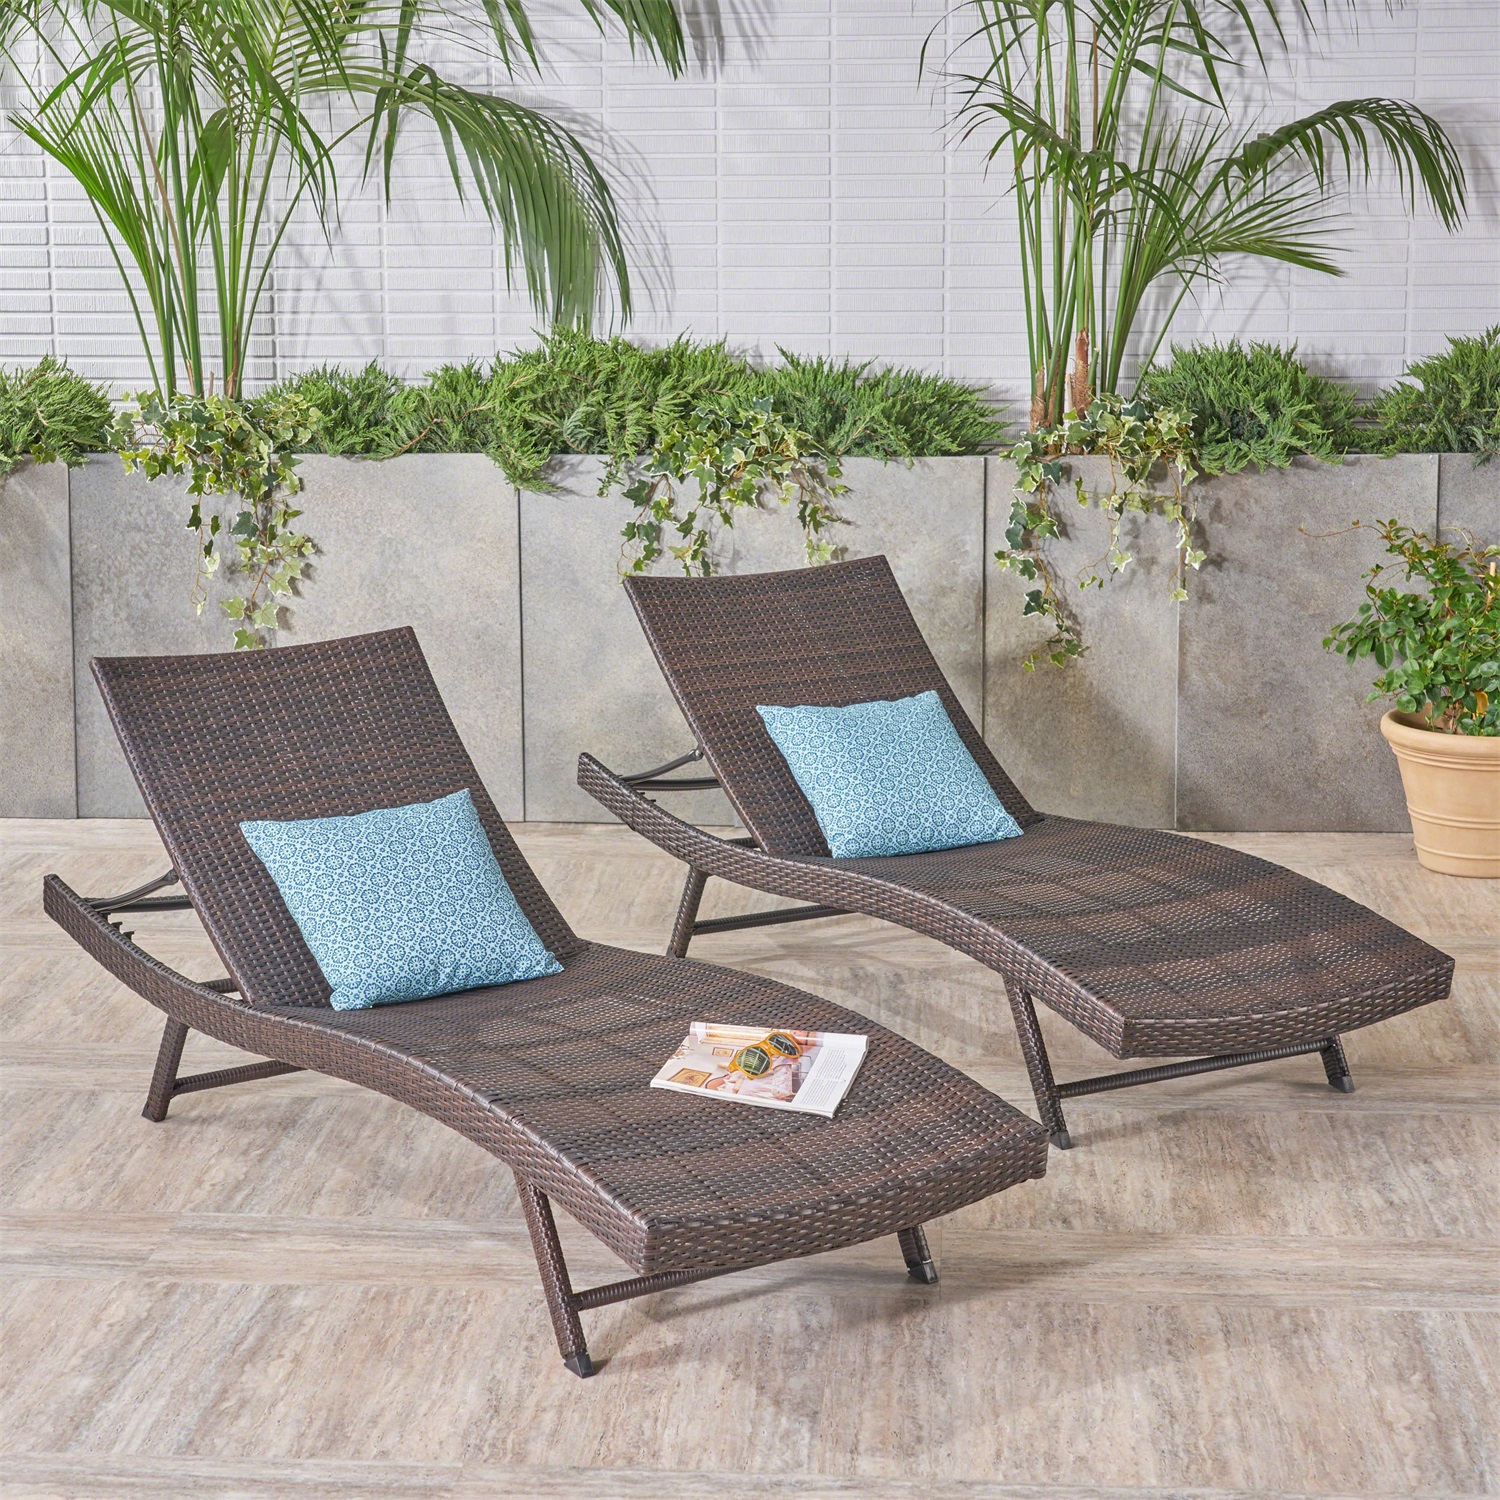 Canddidliike Set of 2 Rattan Patio Chaise Lounges, Outdoor Wicker Reclining Lounge Chairs with Adjustable - Brown - image 2 of 10